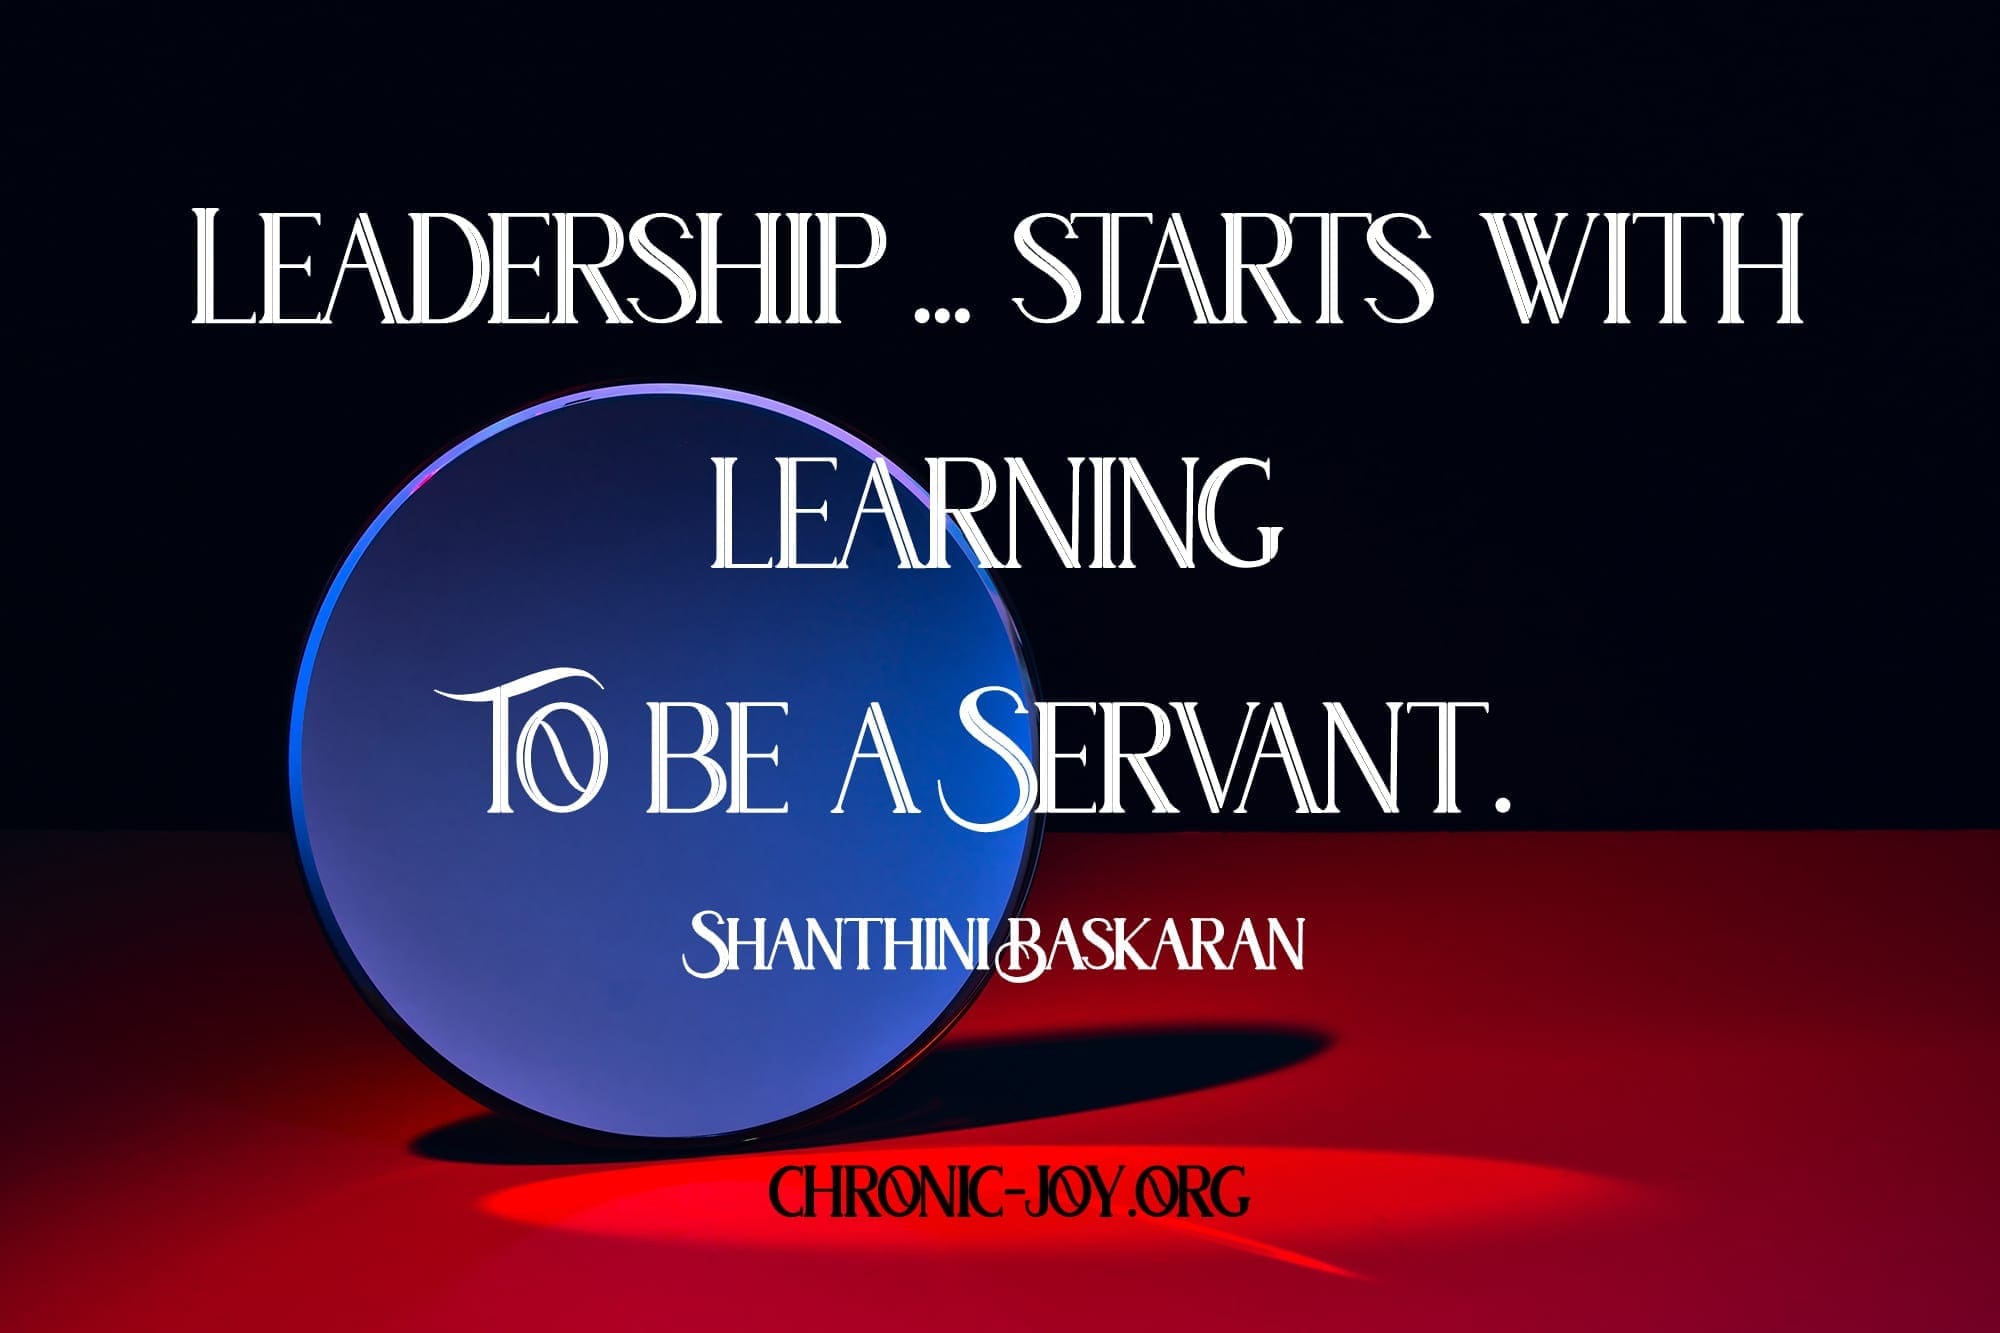 "Leadership ... starts with learning to be a servant." Shanthini Baskaran